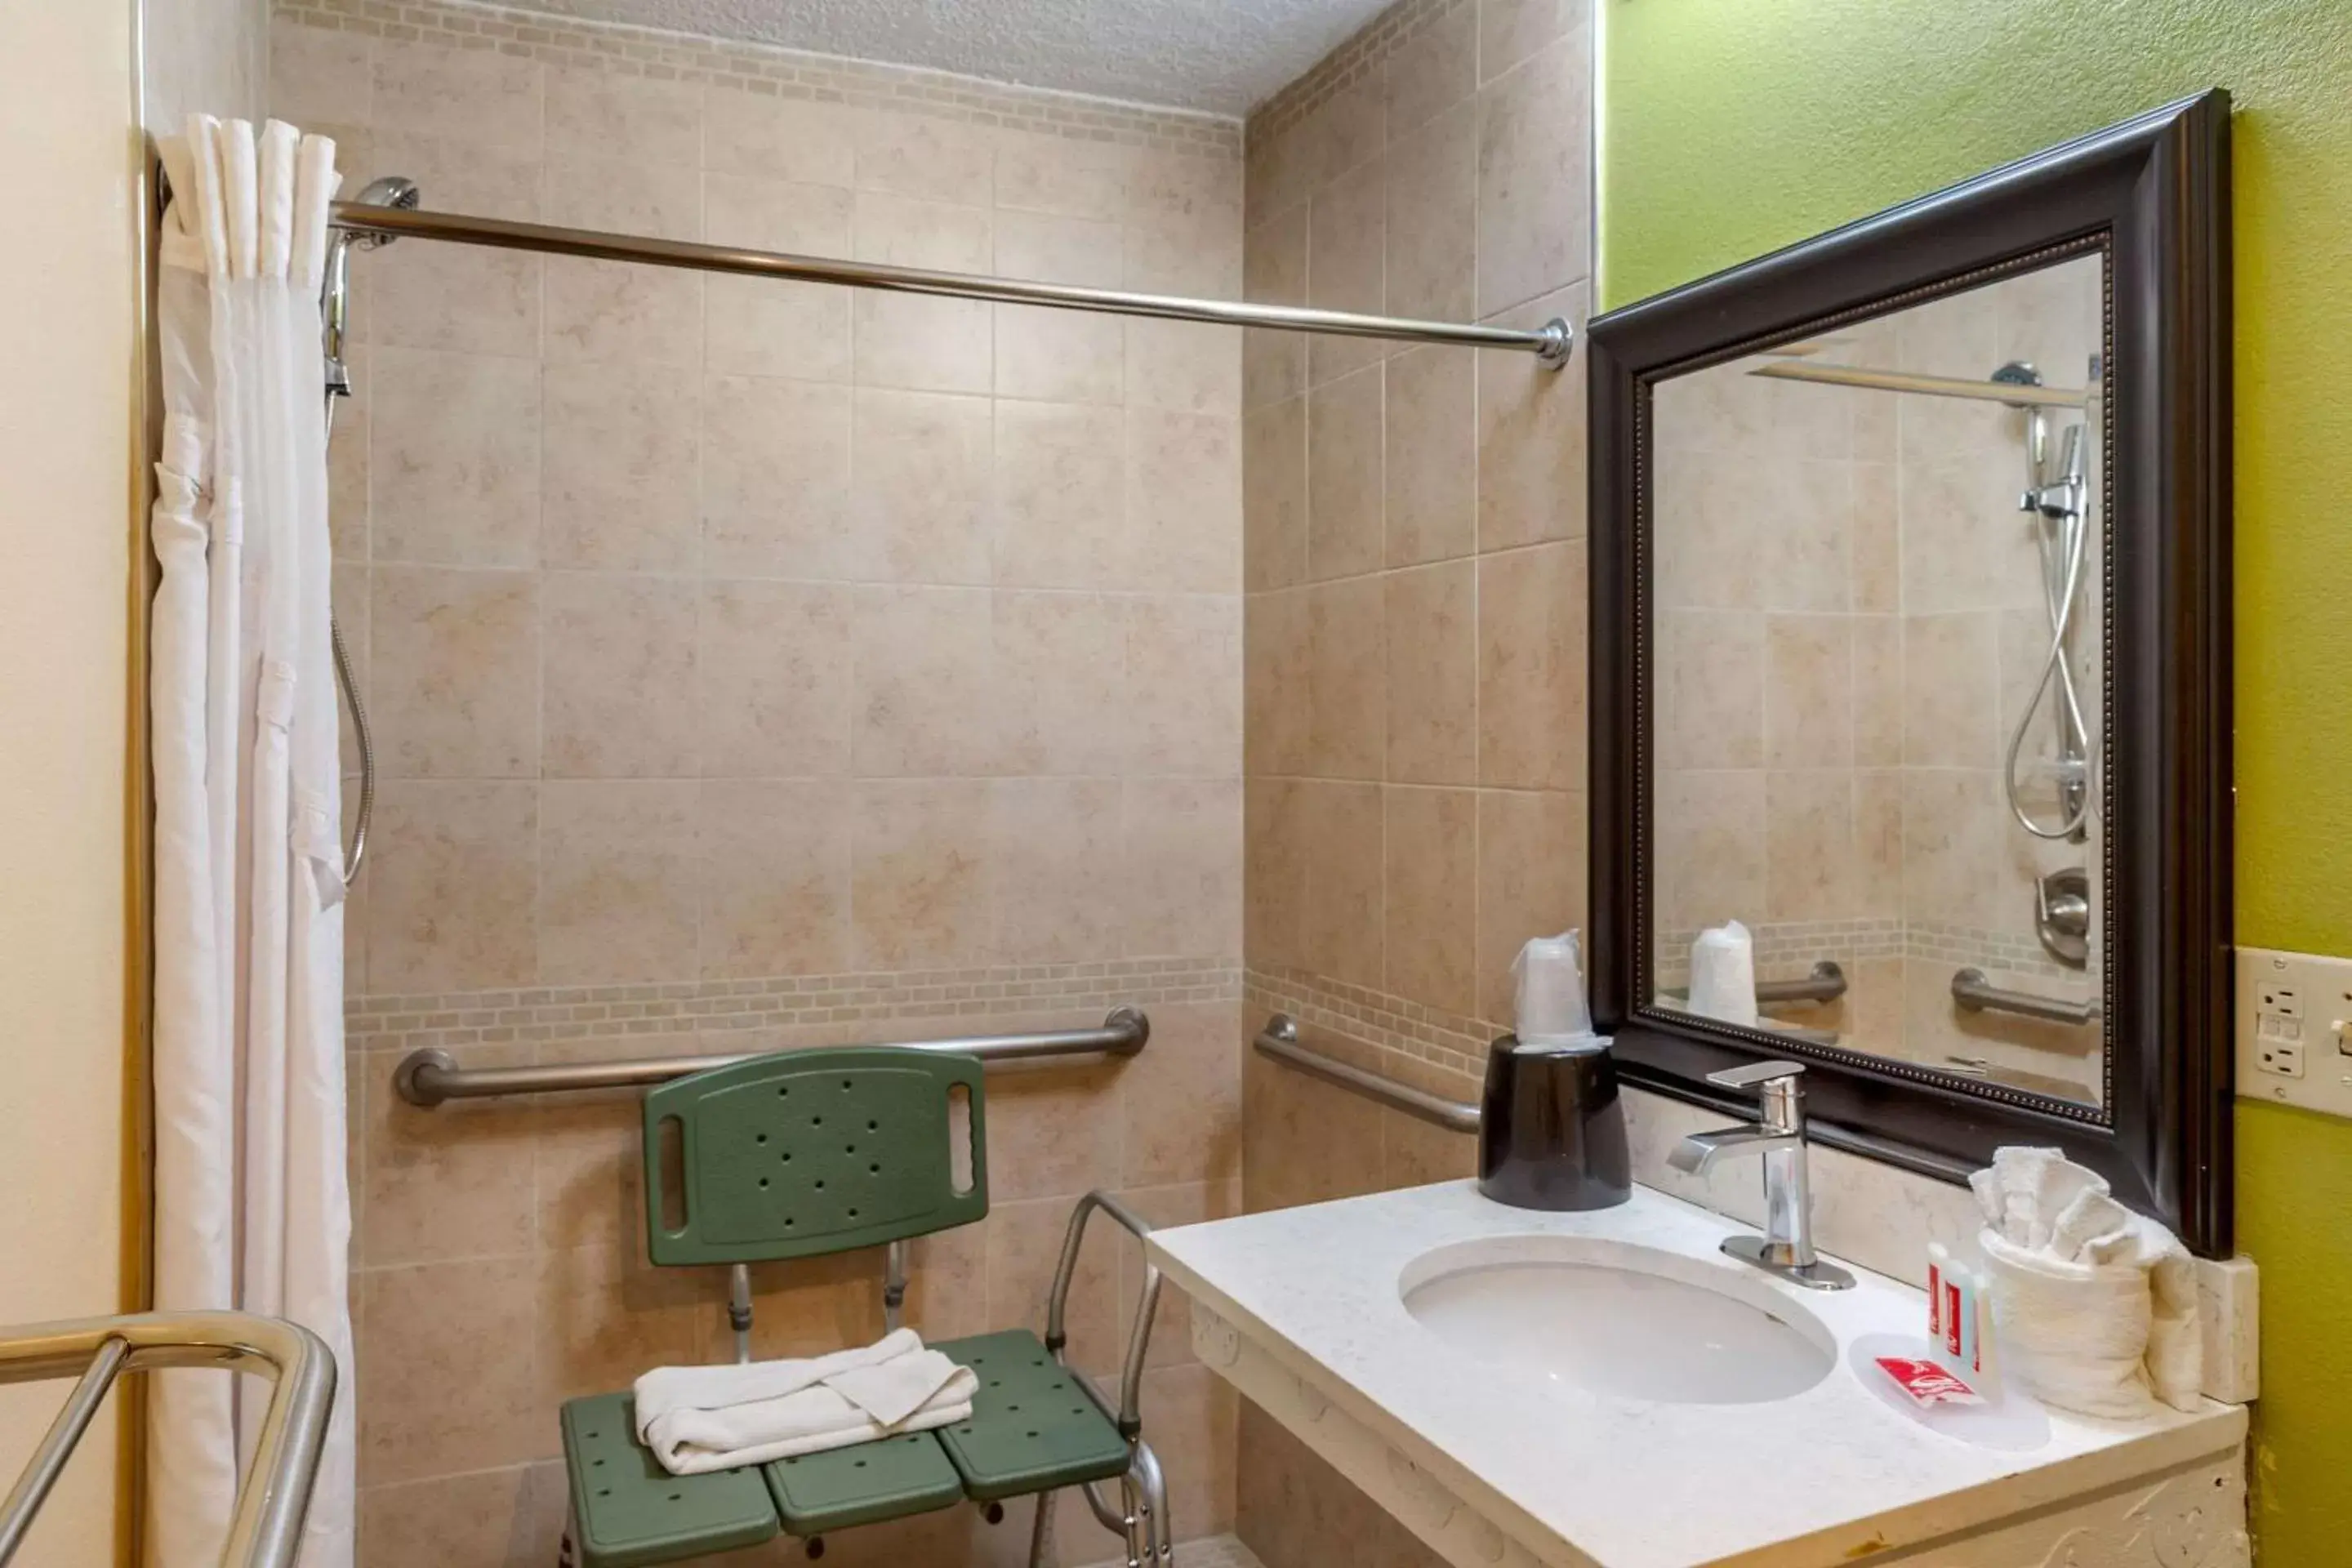 Bathroom in Econo Lodge West - Coors Blvd